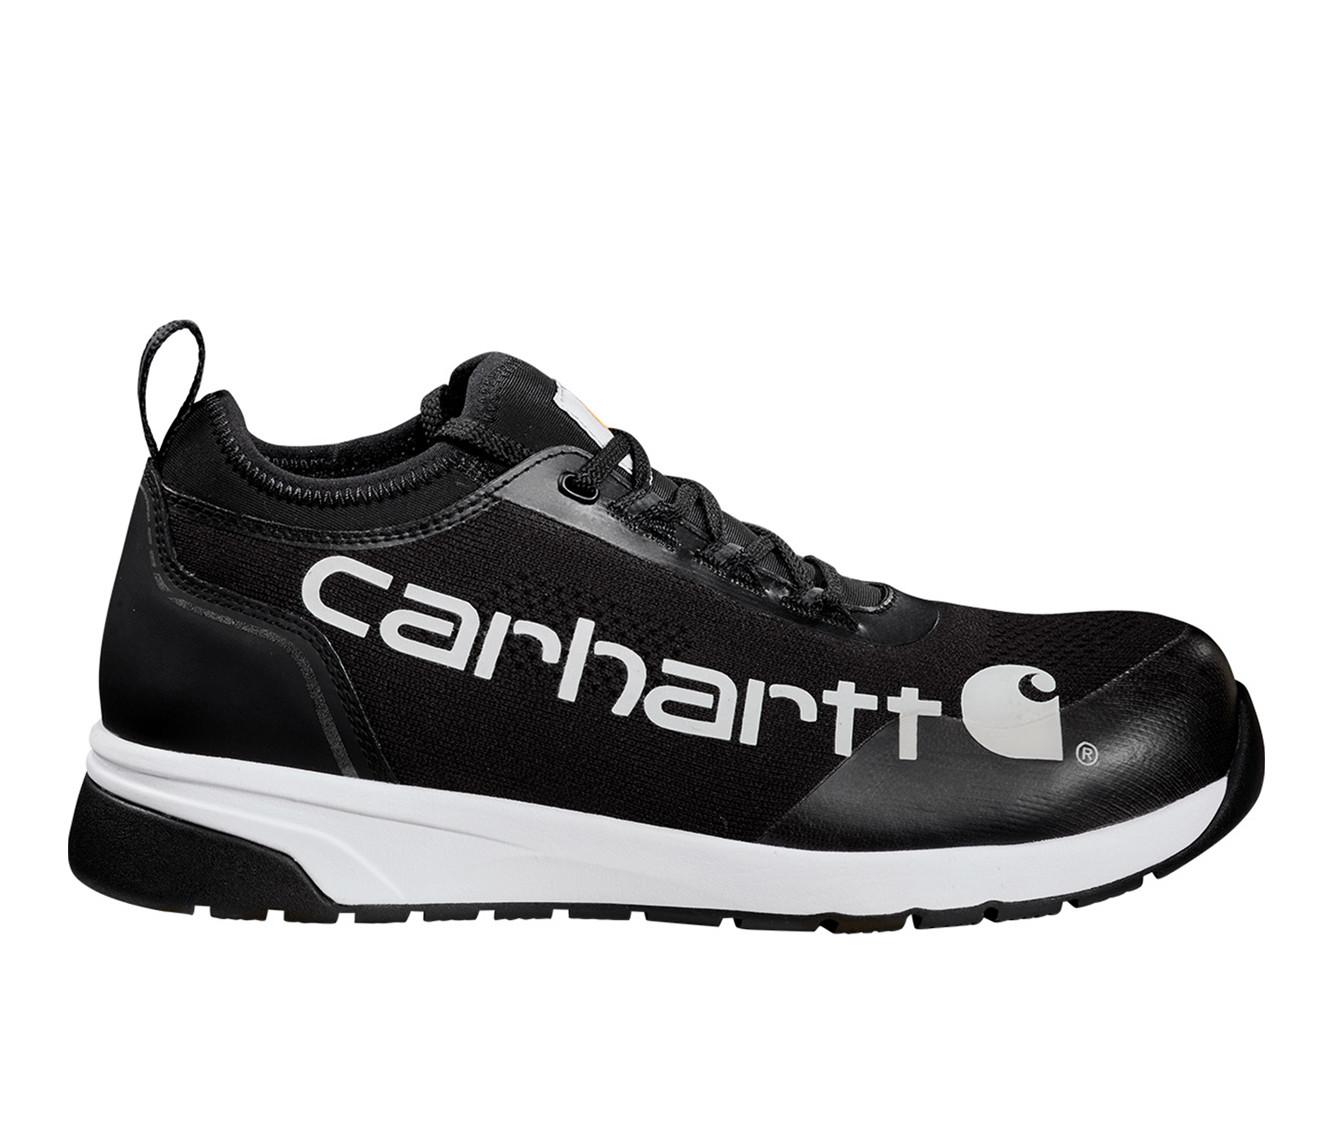 Men's Carhartt FA3003 Men's Force 3" SD Soft Toe Safety Shoes